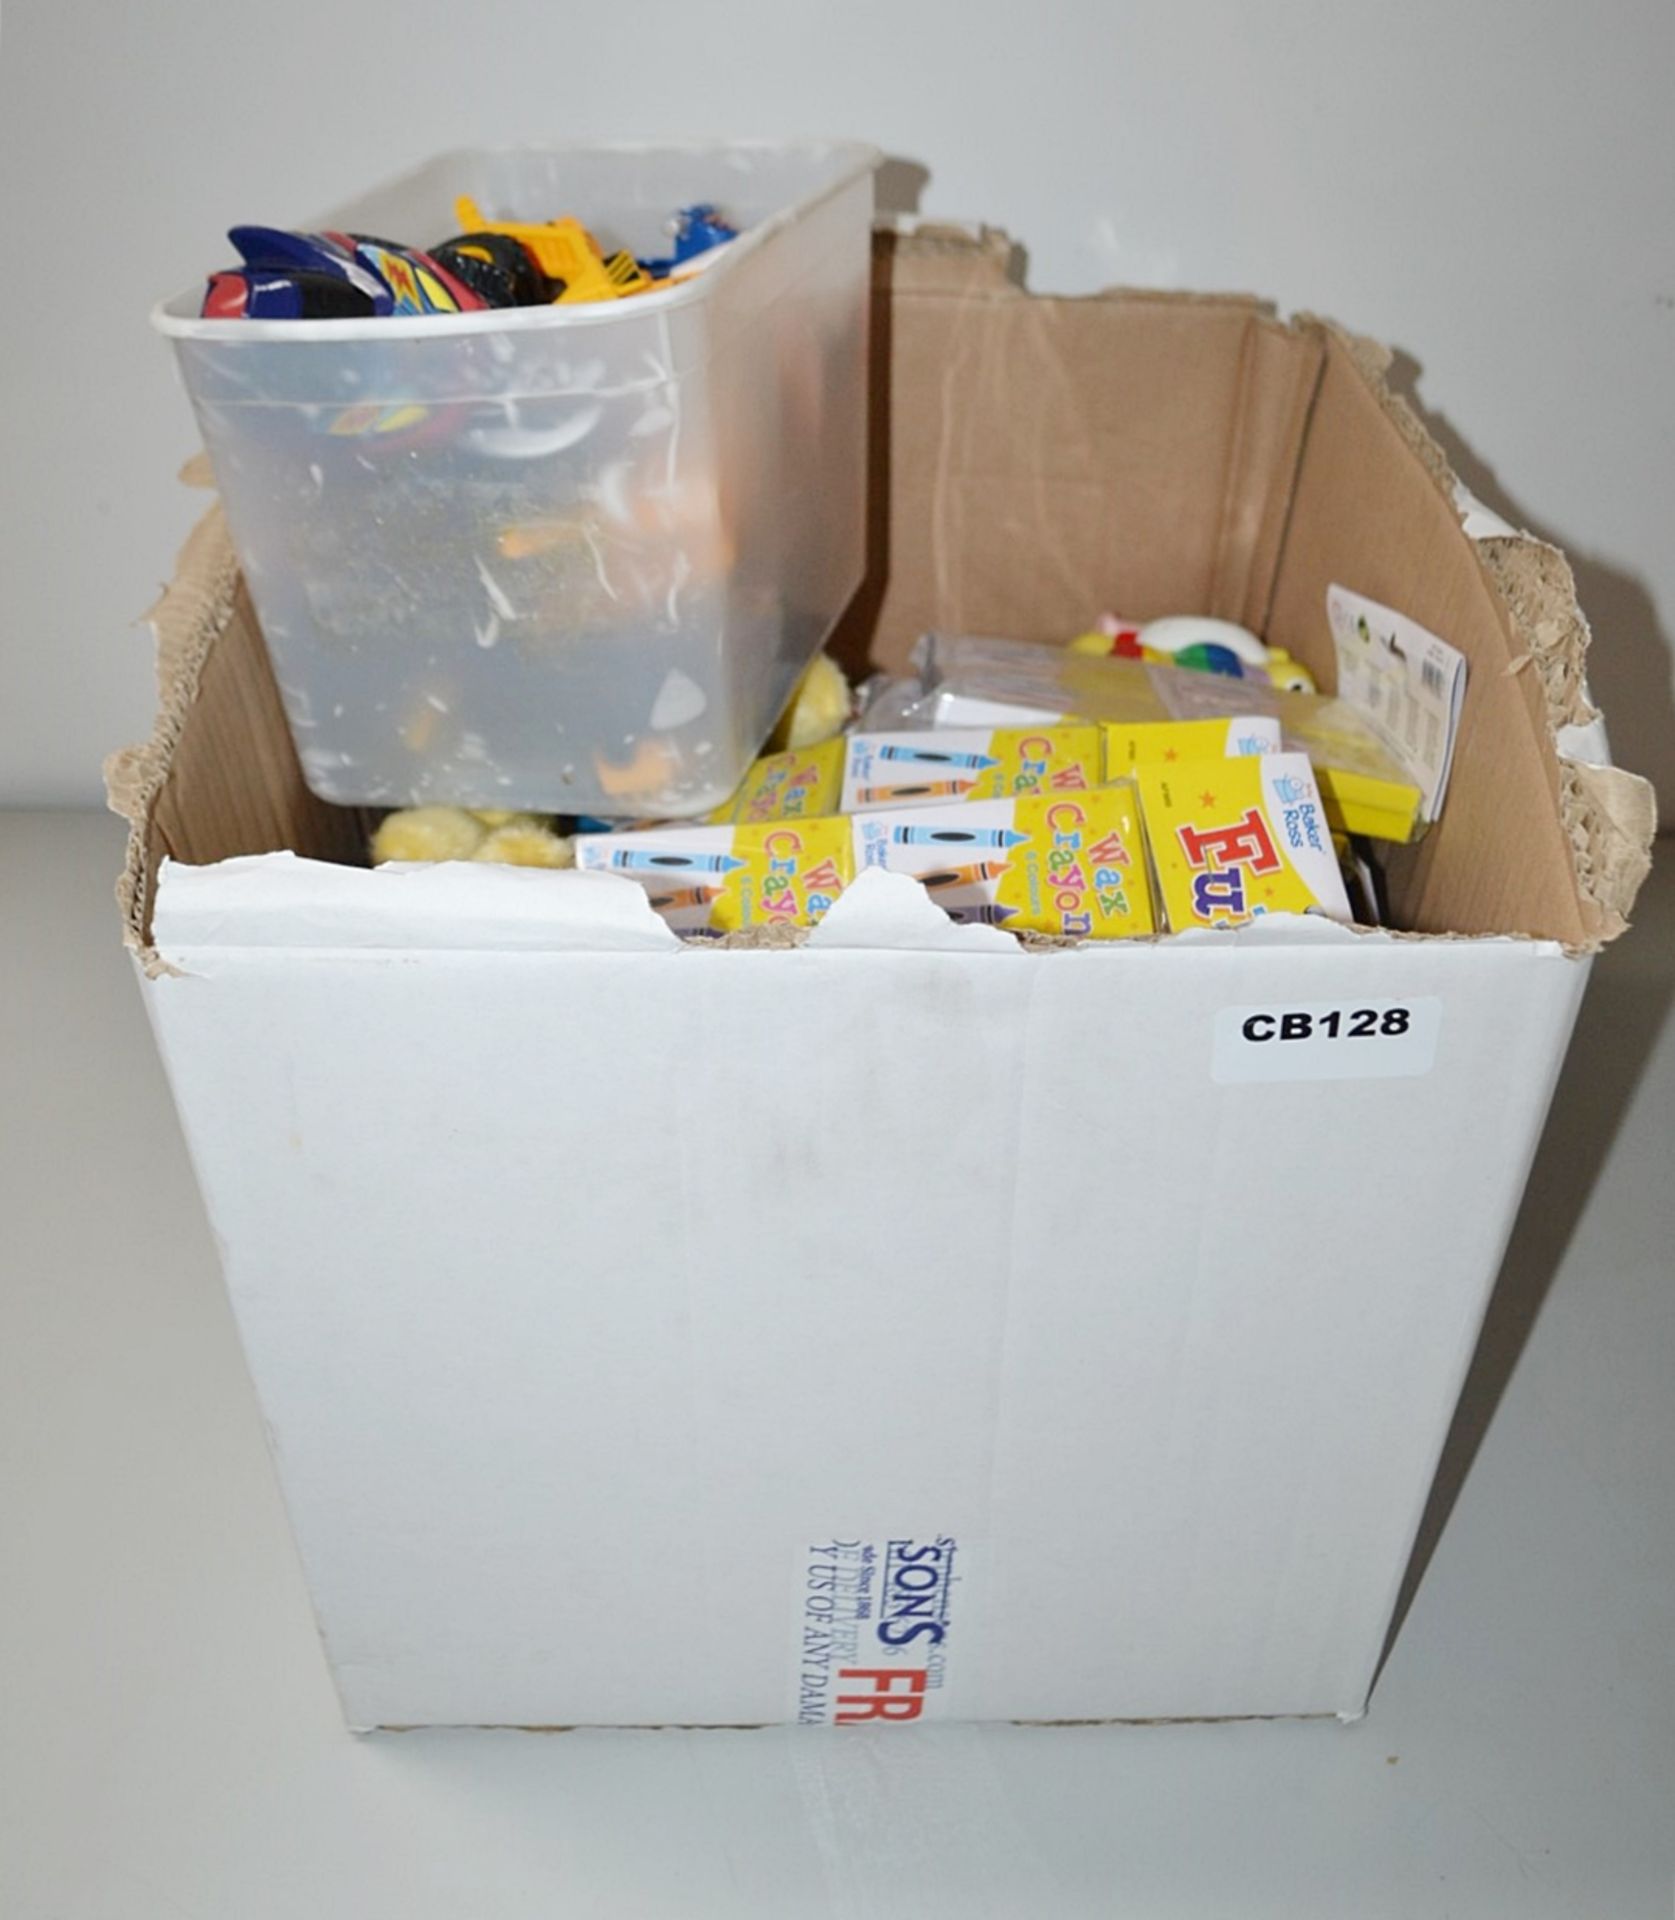 1 x Box Of Children's Toys, Games and Crayons - Ref: CB128 - CL425 - Location: Altrincham WA14